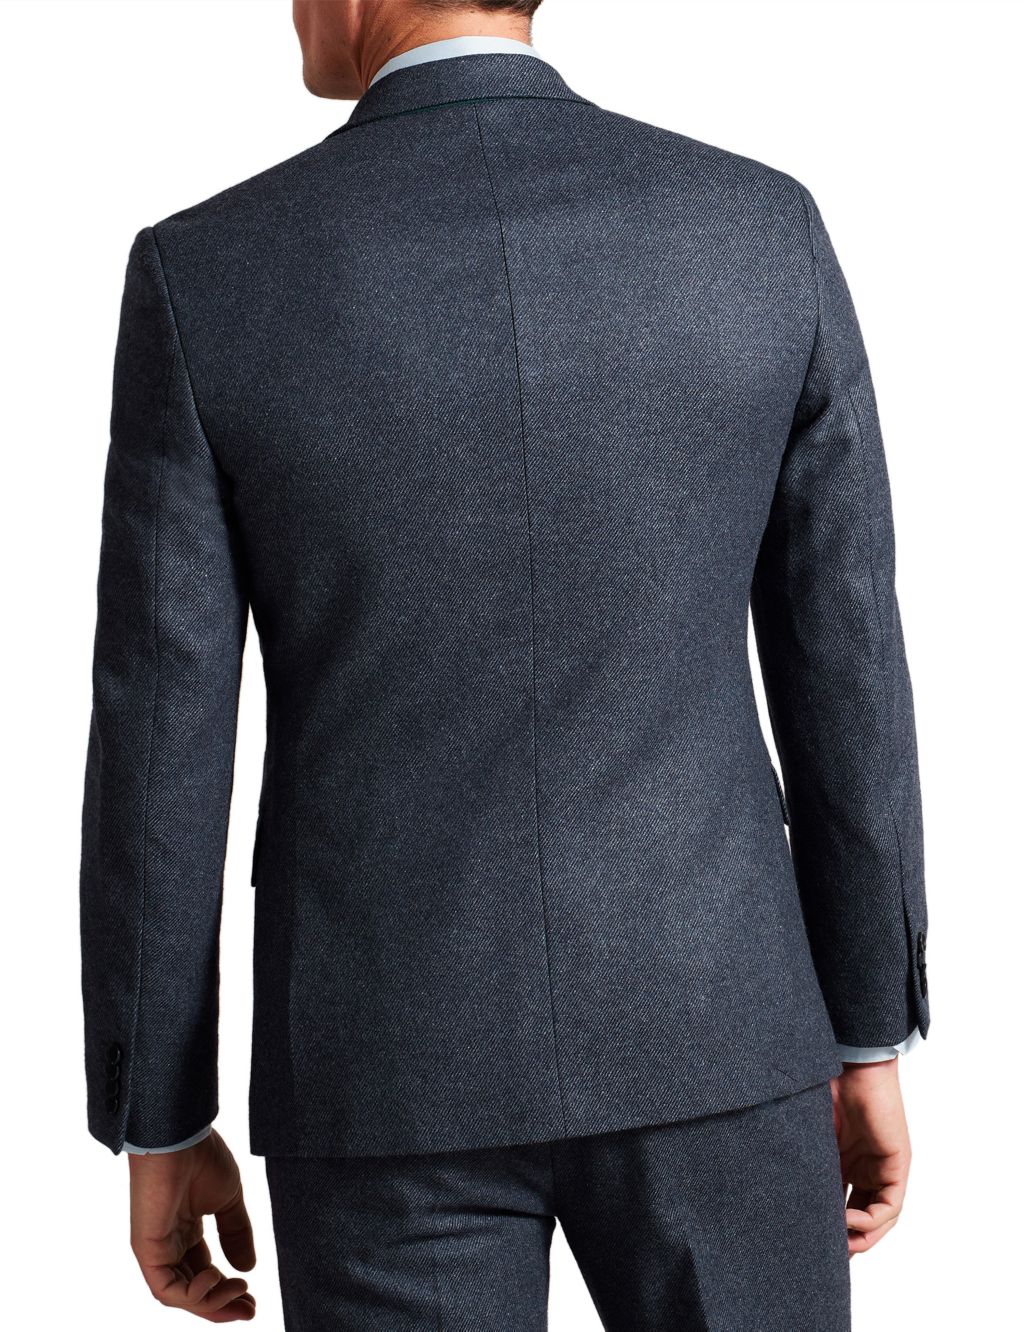 Regular Fit Wool Rich Twill Suit Jacket image 4